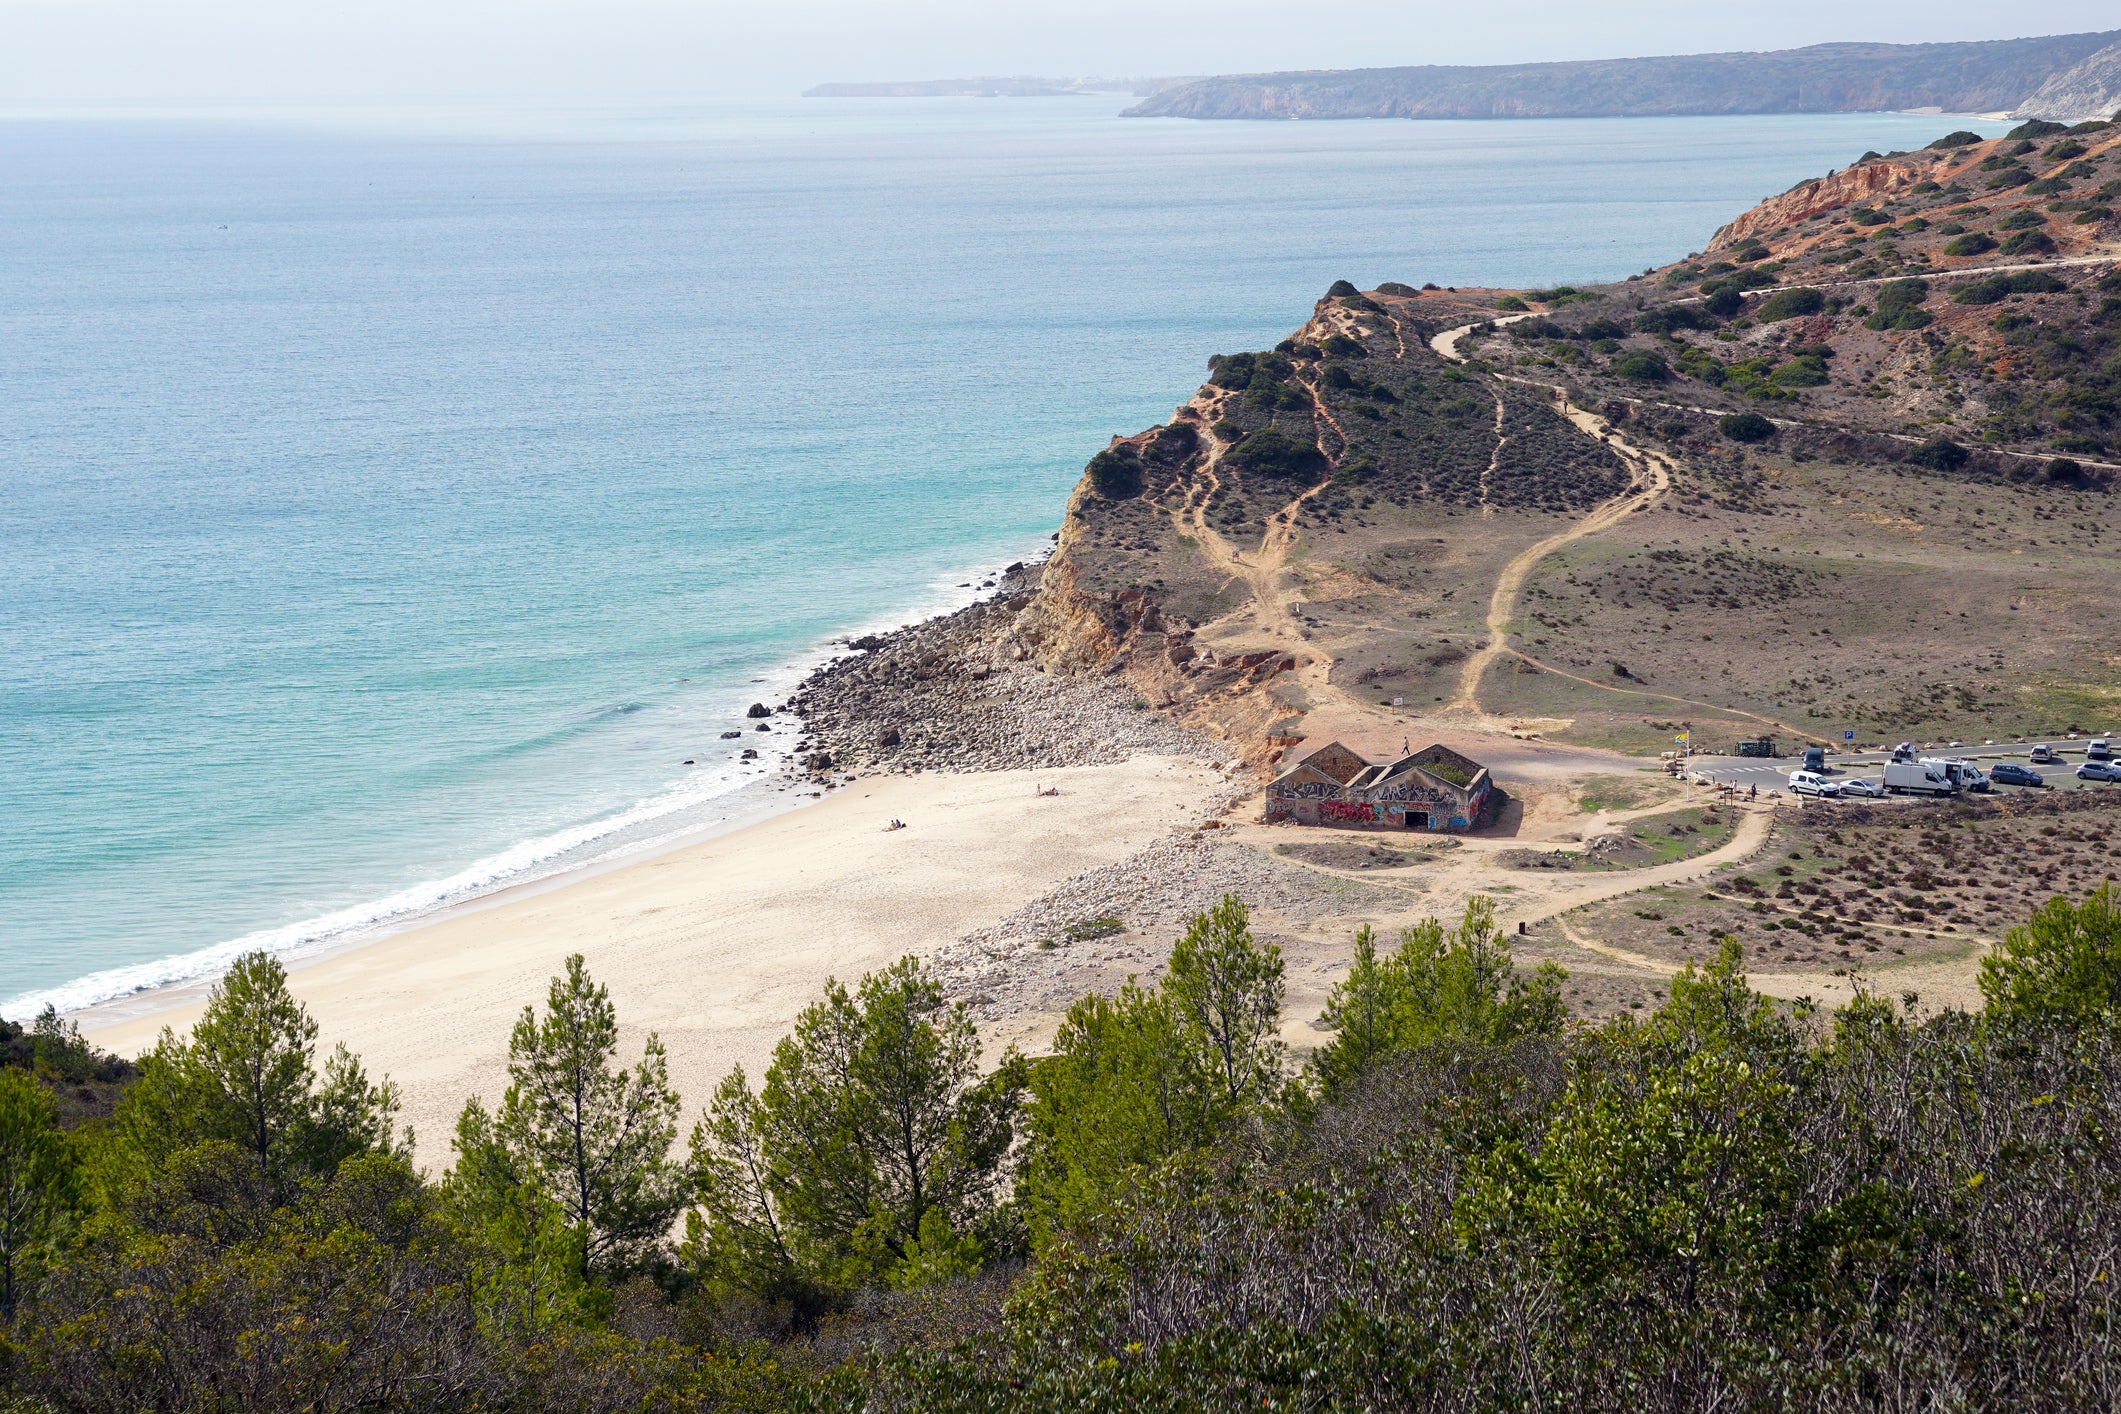 The Algarve’s gorgeous beaches were formerly high priority for motorhome owners